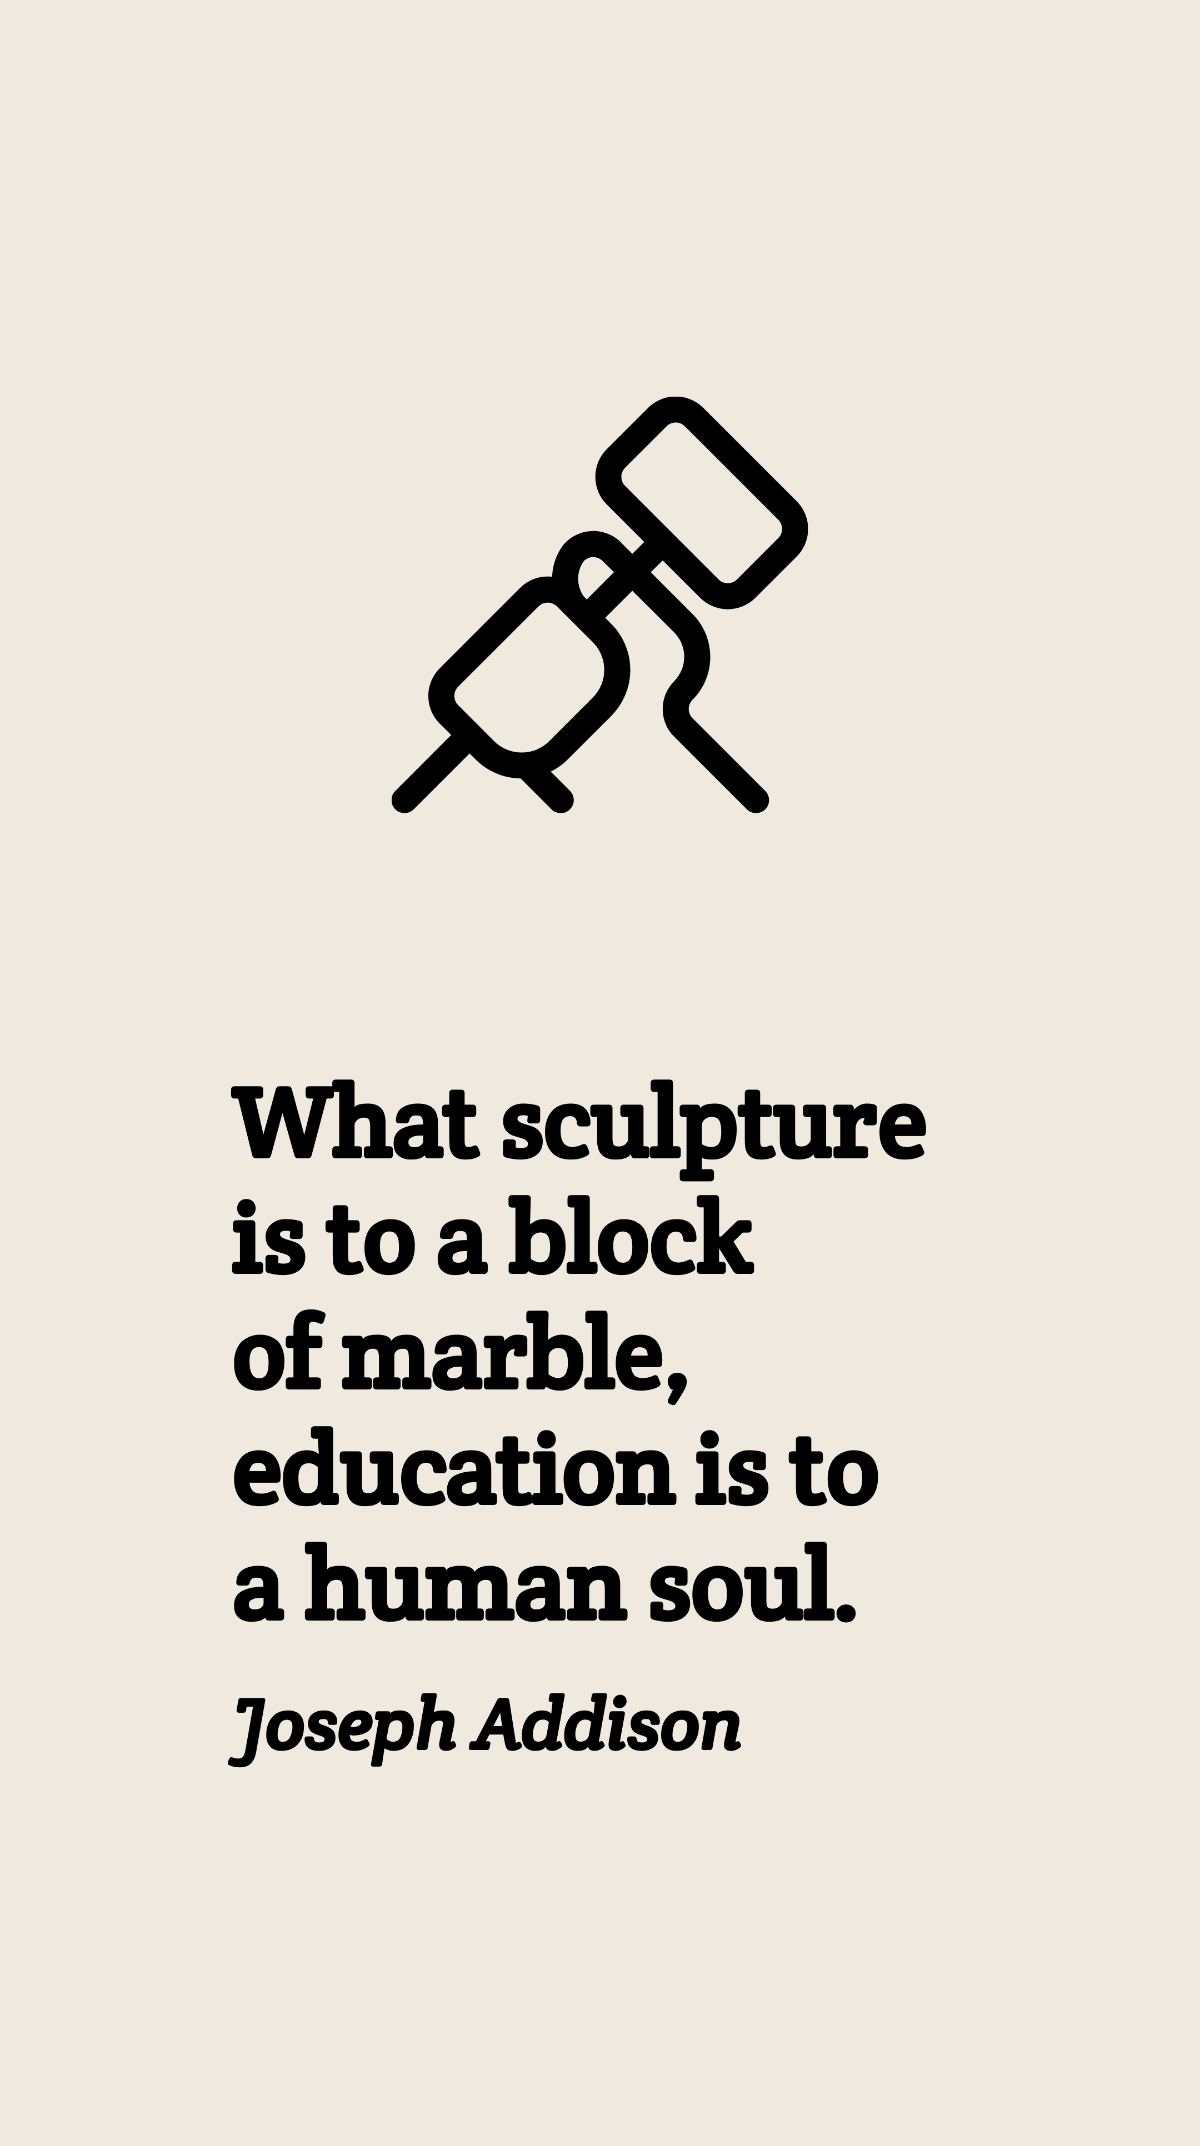 Free Joseph Addison - What sculpture is to a block of marble, education is to a human soul. Template